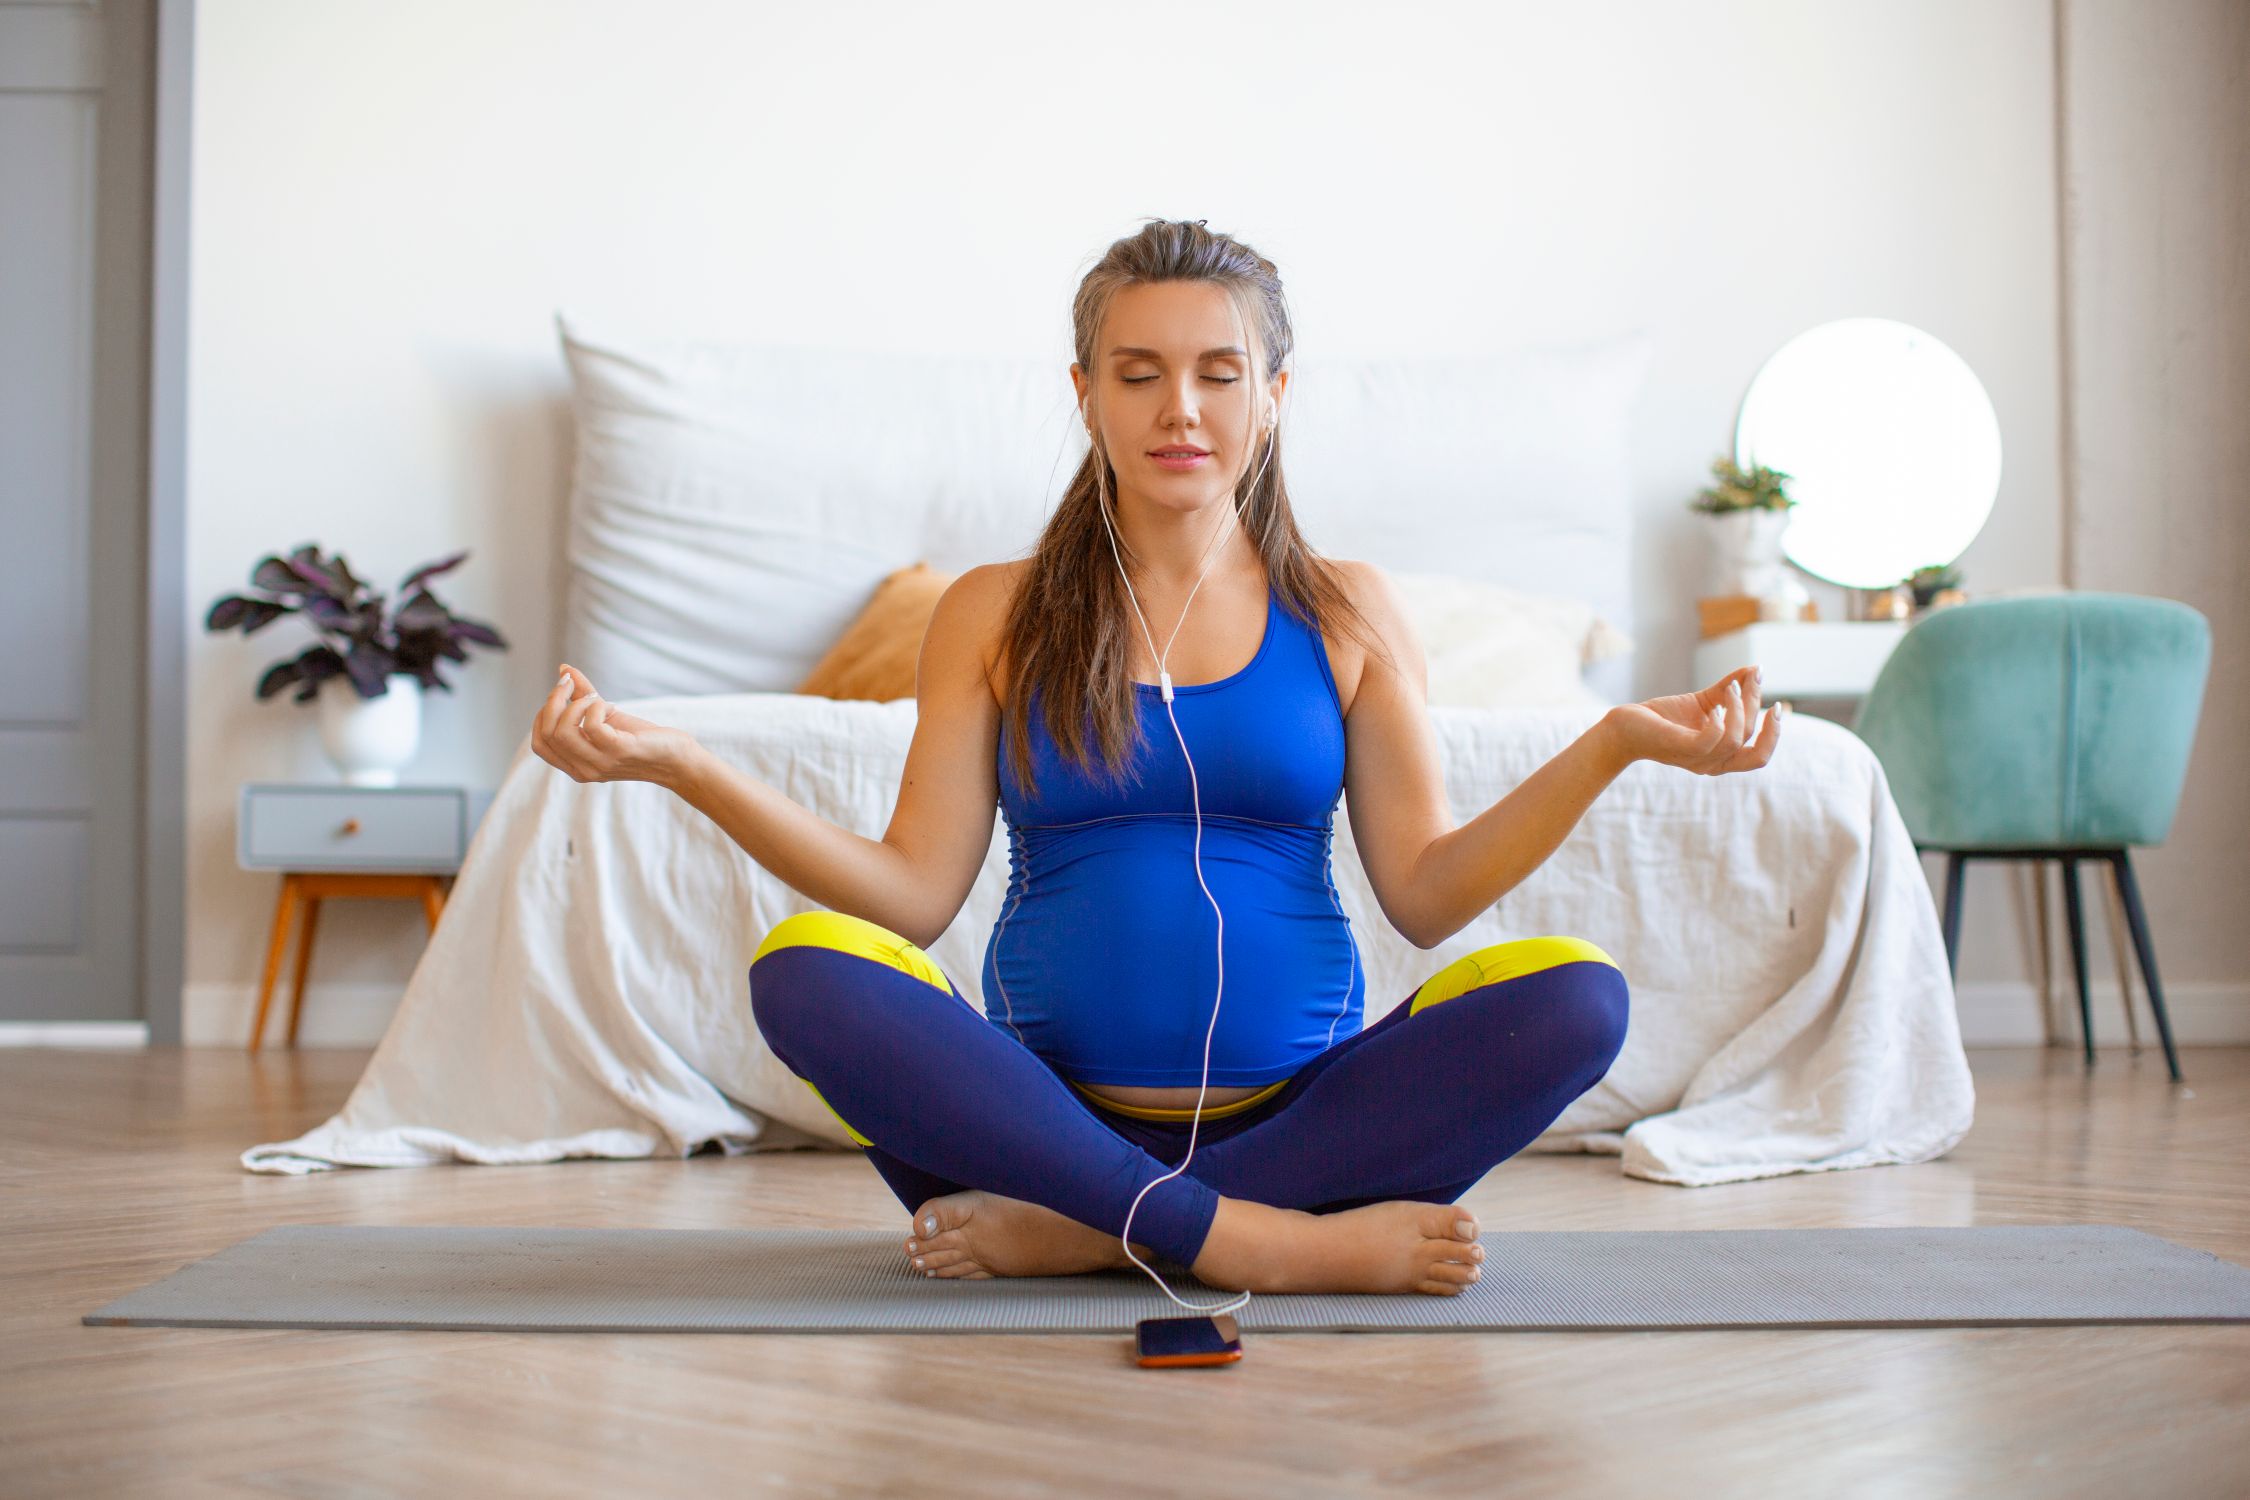 pregnant woman doing relaxation exercises lotus position listening music